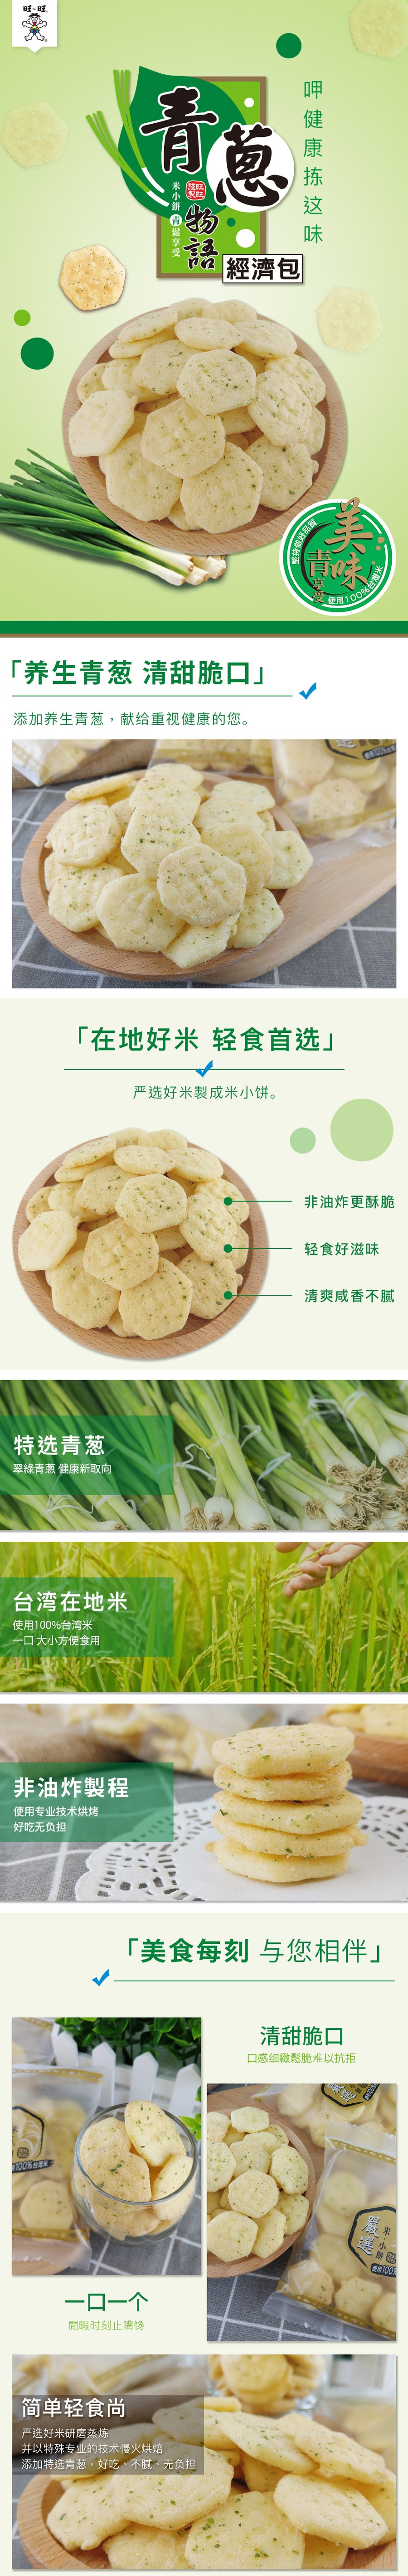 Taiwan Rice Crackers Senbei With Spring Onion Flavor - Share Pack【Vegan】240g*7 Packs 1680g